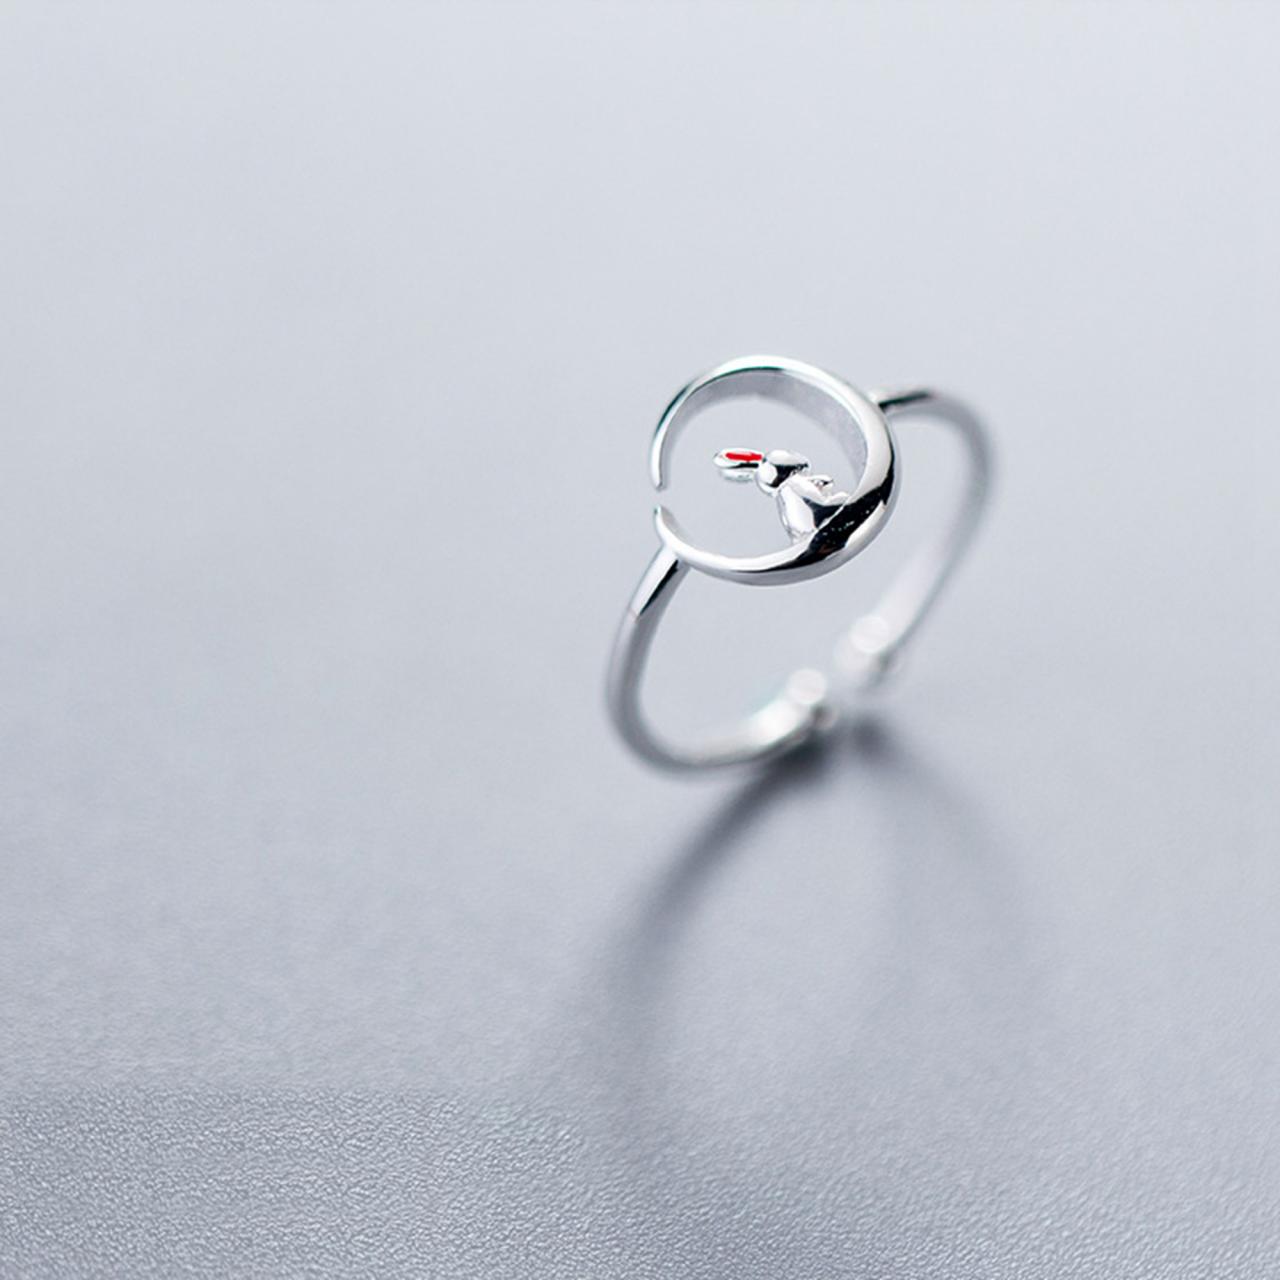 Adjustable Rabbit Ring, Minimalist Rings, Dainty Ring, Women Ring, Everyday Jewelry,sterling Silver Rabbit Rings